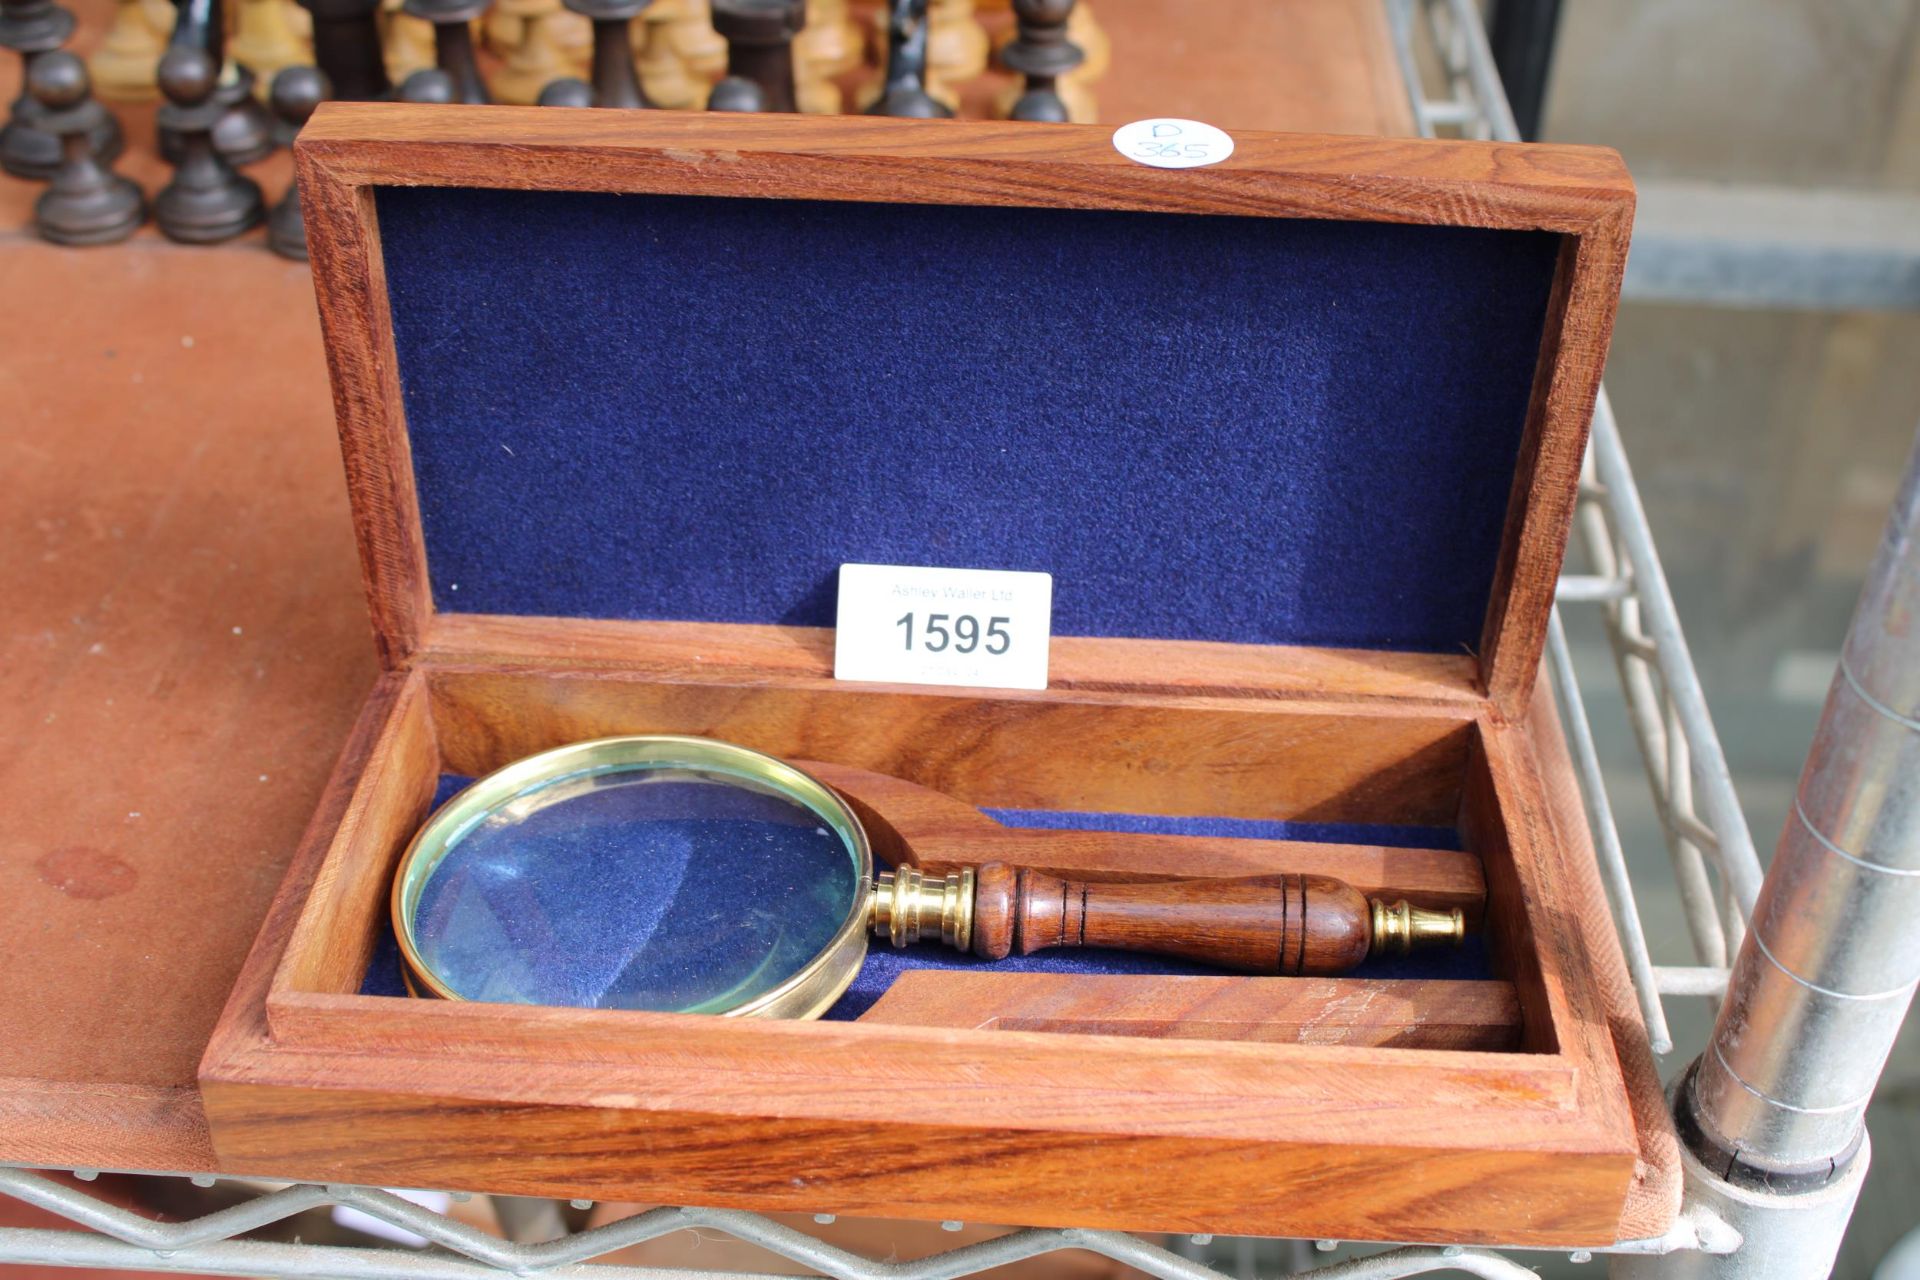 A VINTAGE WOODEN HANDLED BRASS MAGNIFYING GLASS WITH INLAID PRESENTATION BOX